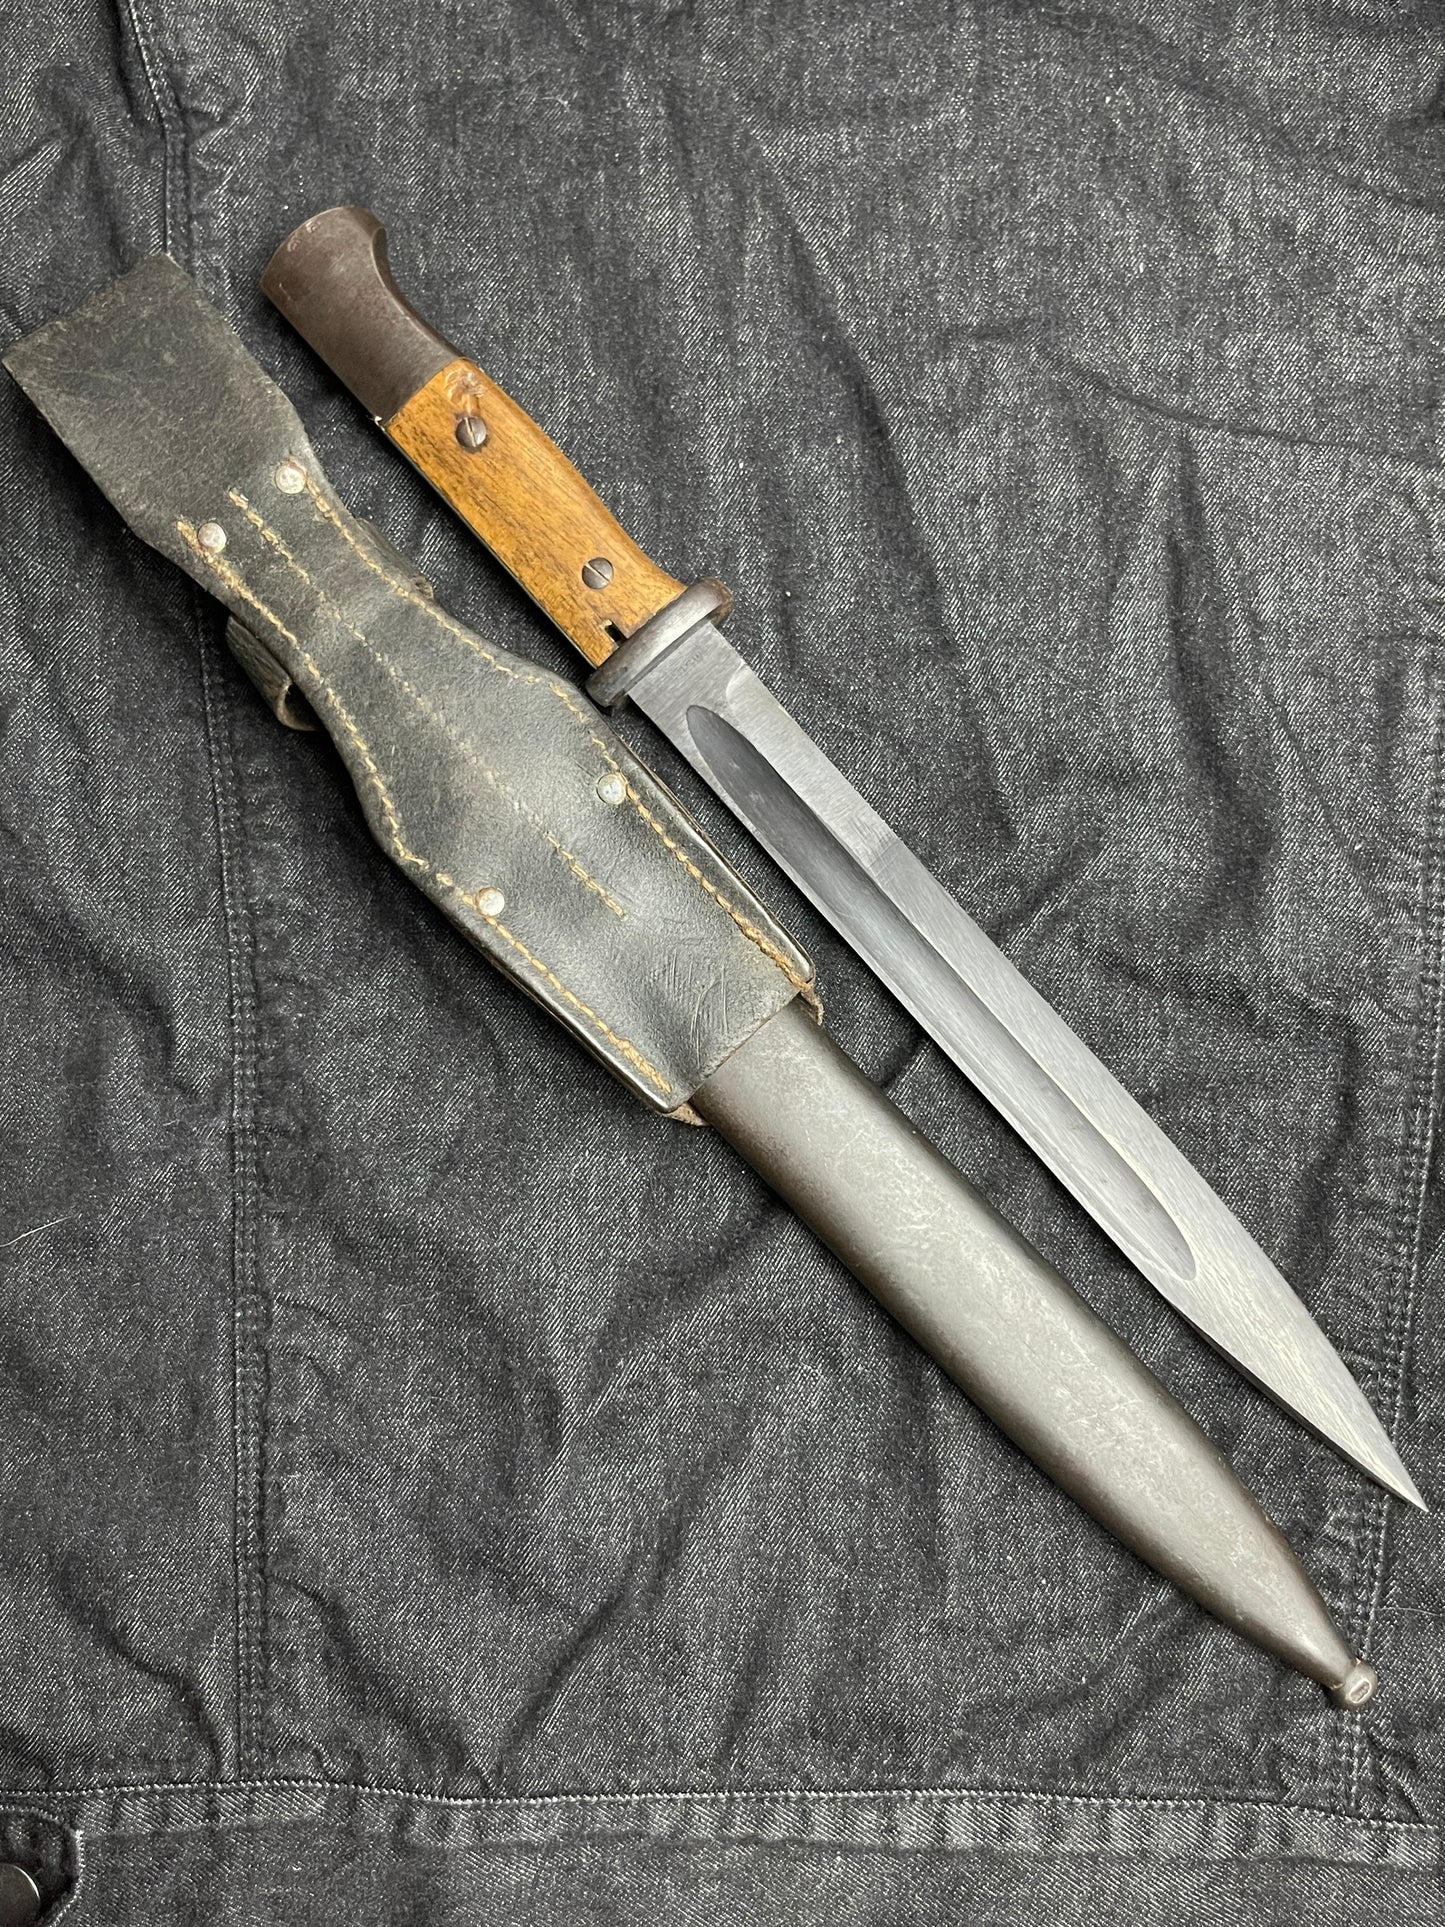 GERMAN WW2 1943 S84/98 III PATTERN MATCHING COMBAT BAYONET BY E.U.F. HORSTER W/ EARLY LEATHER FROG